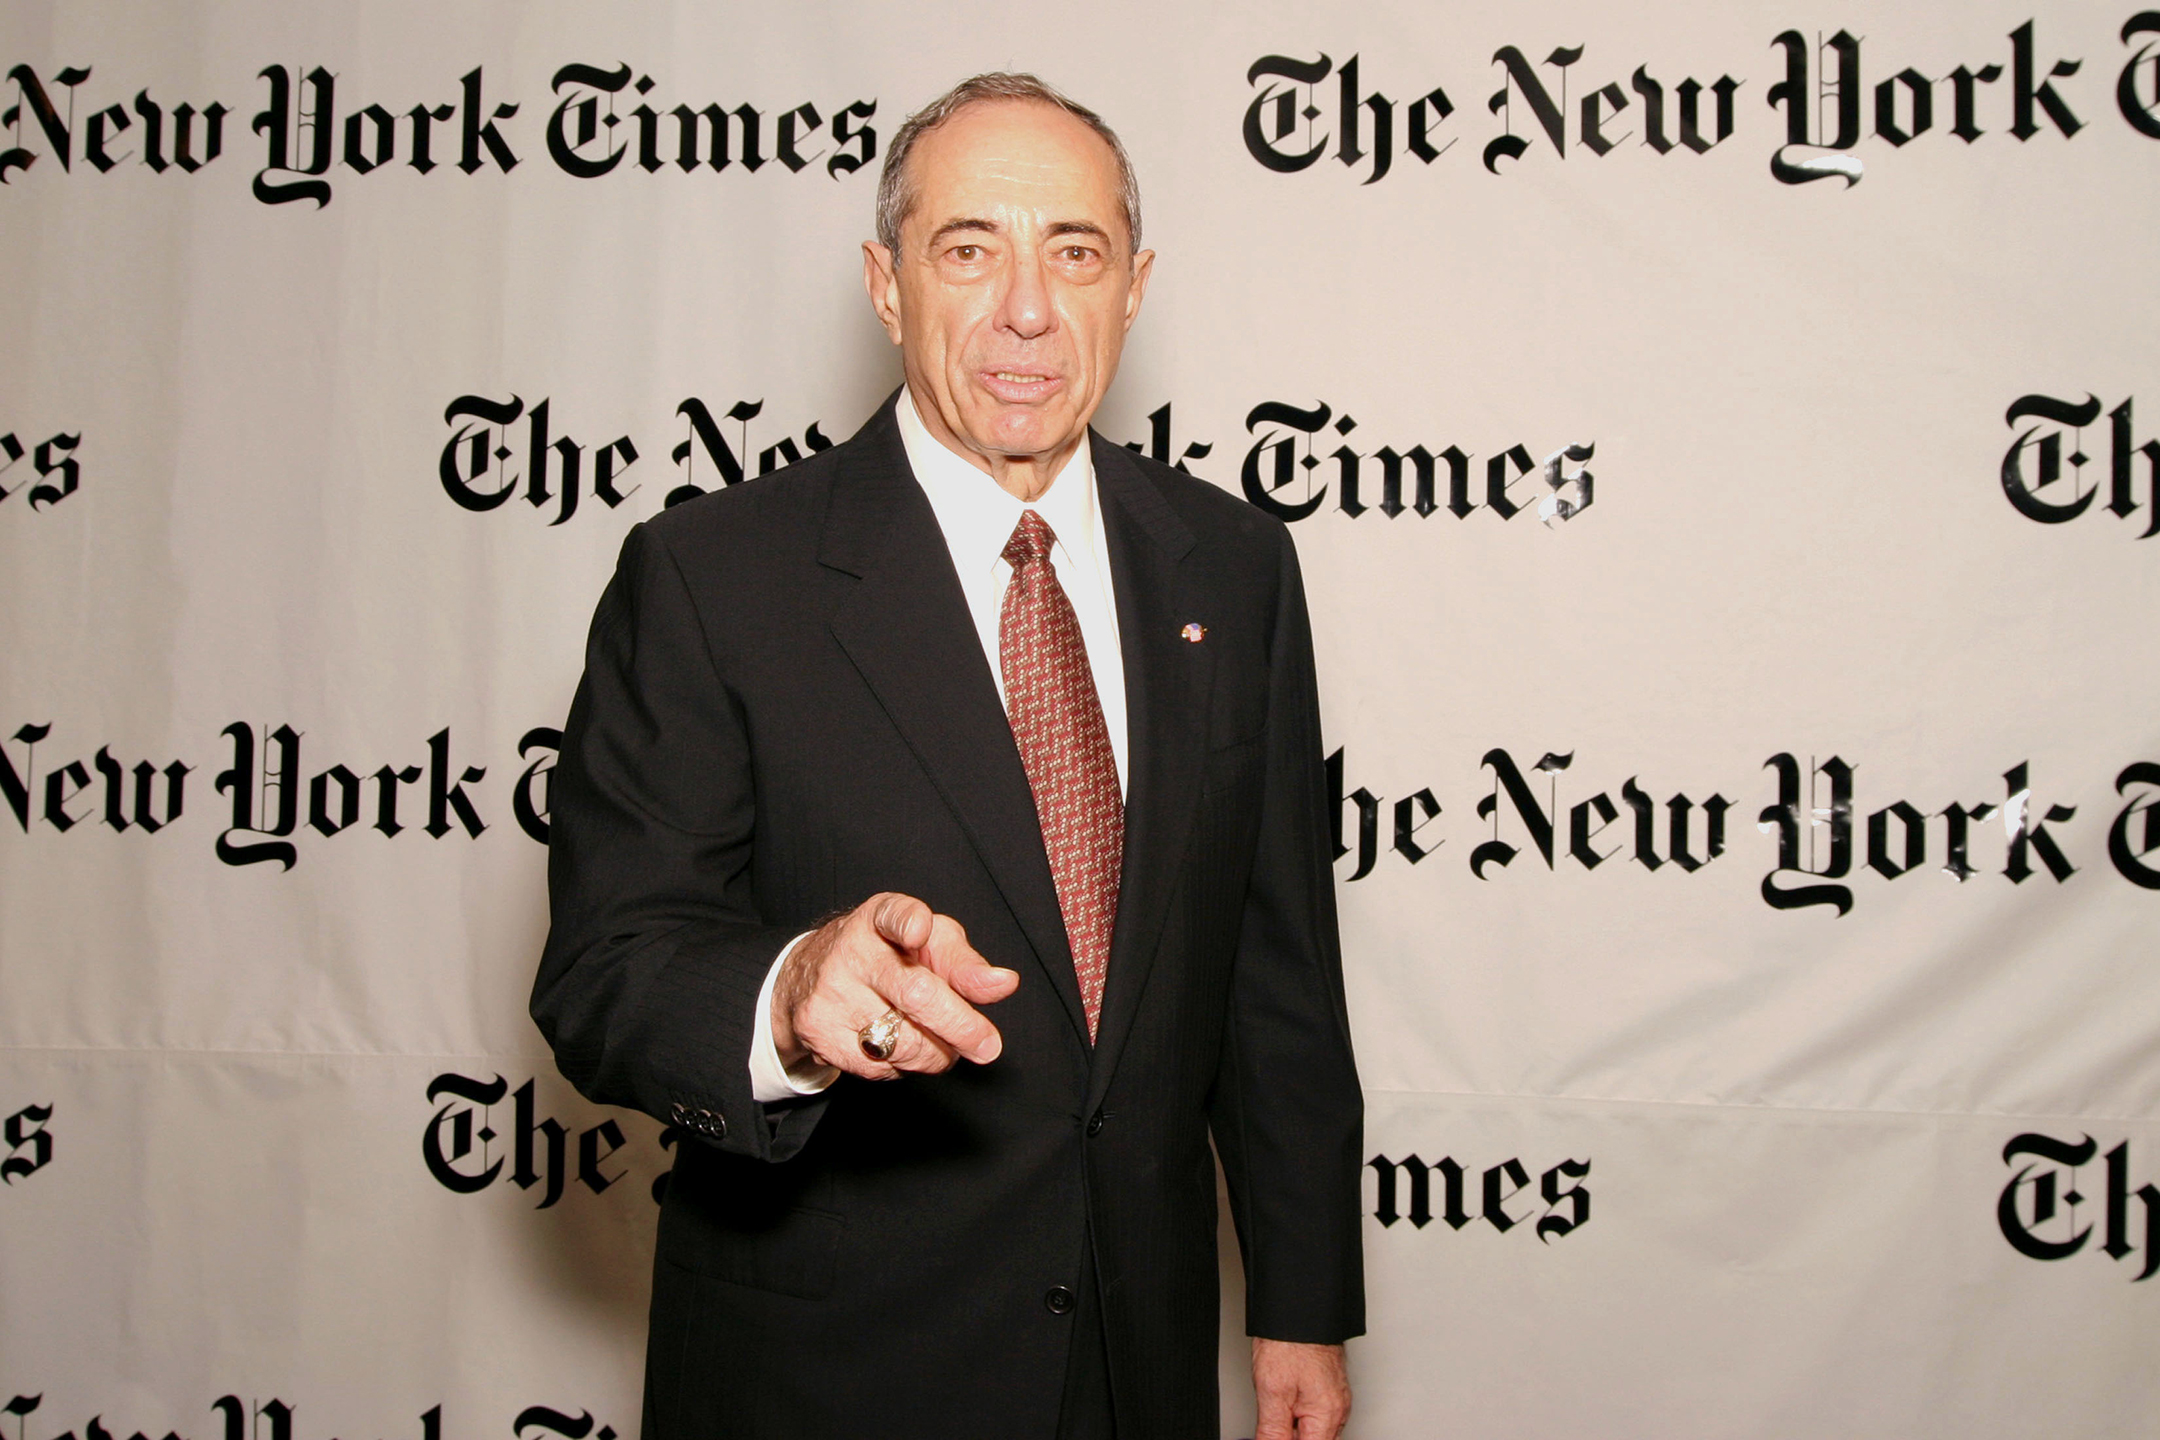 former new york governor mario cuomo points at the camera while standing in front of a new york times banner